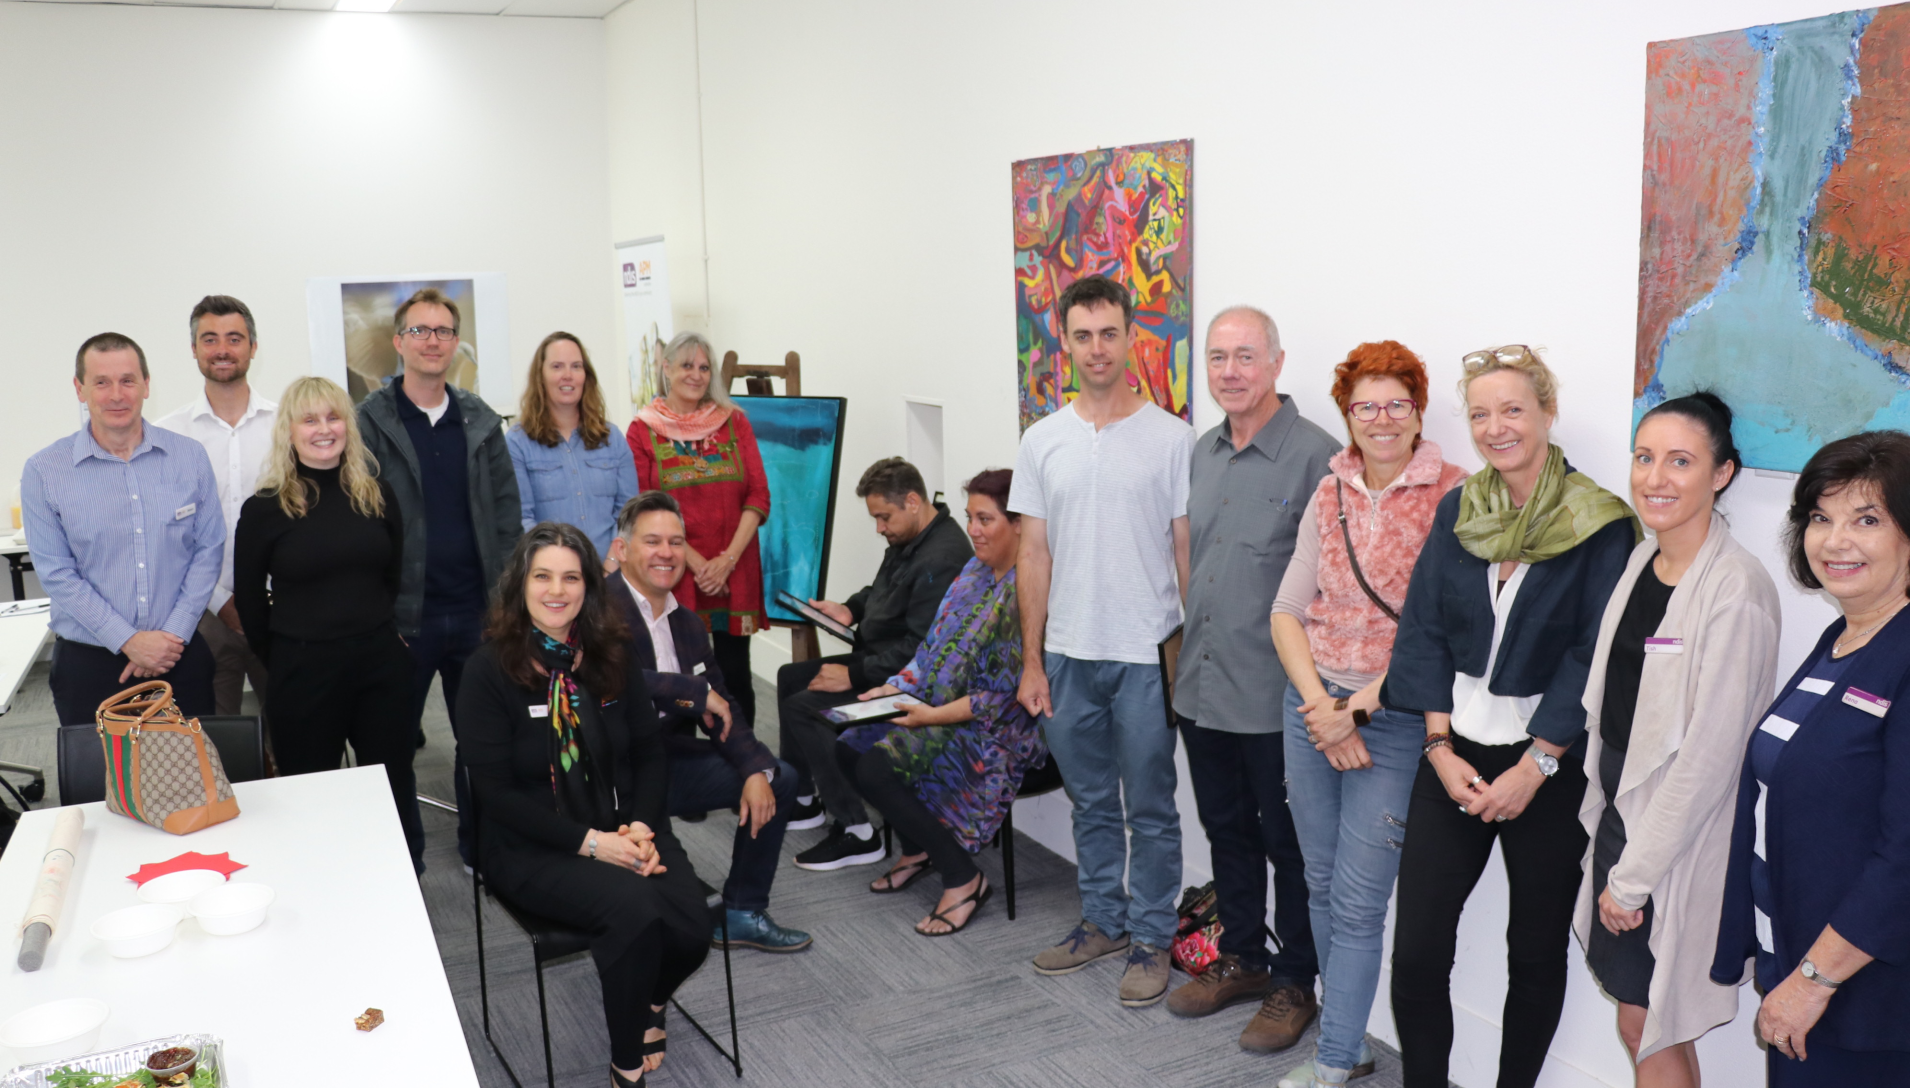 Attendees at the art launch event at APM Fremantle office